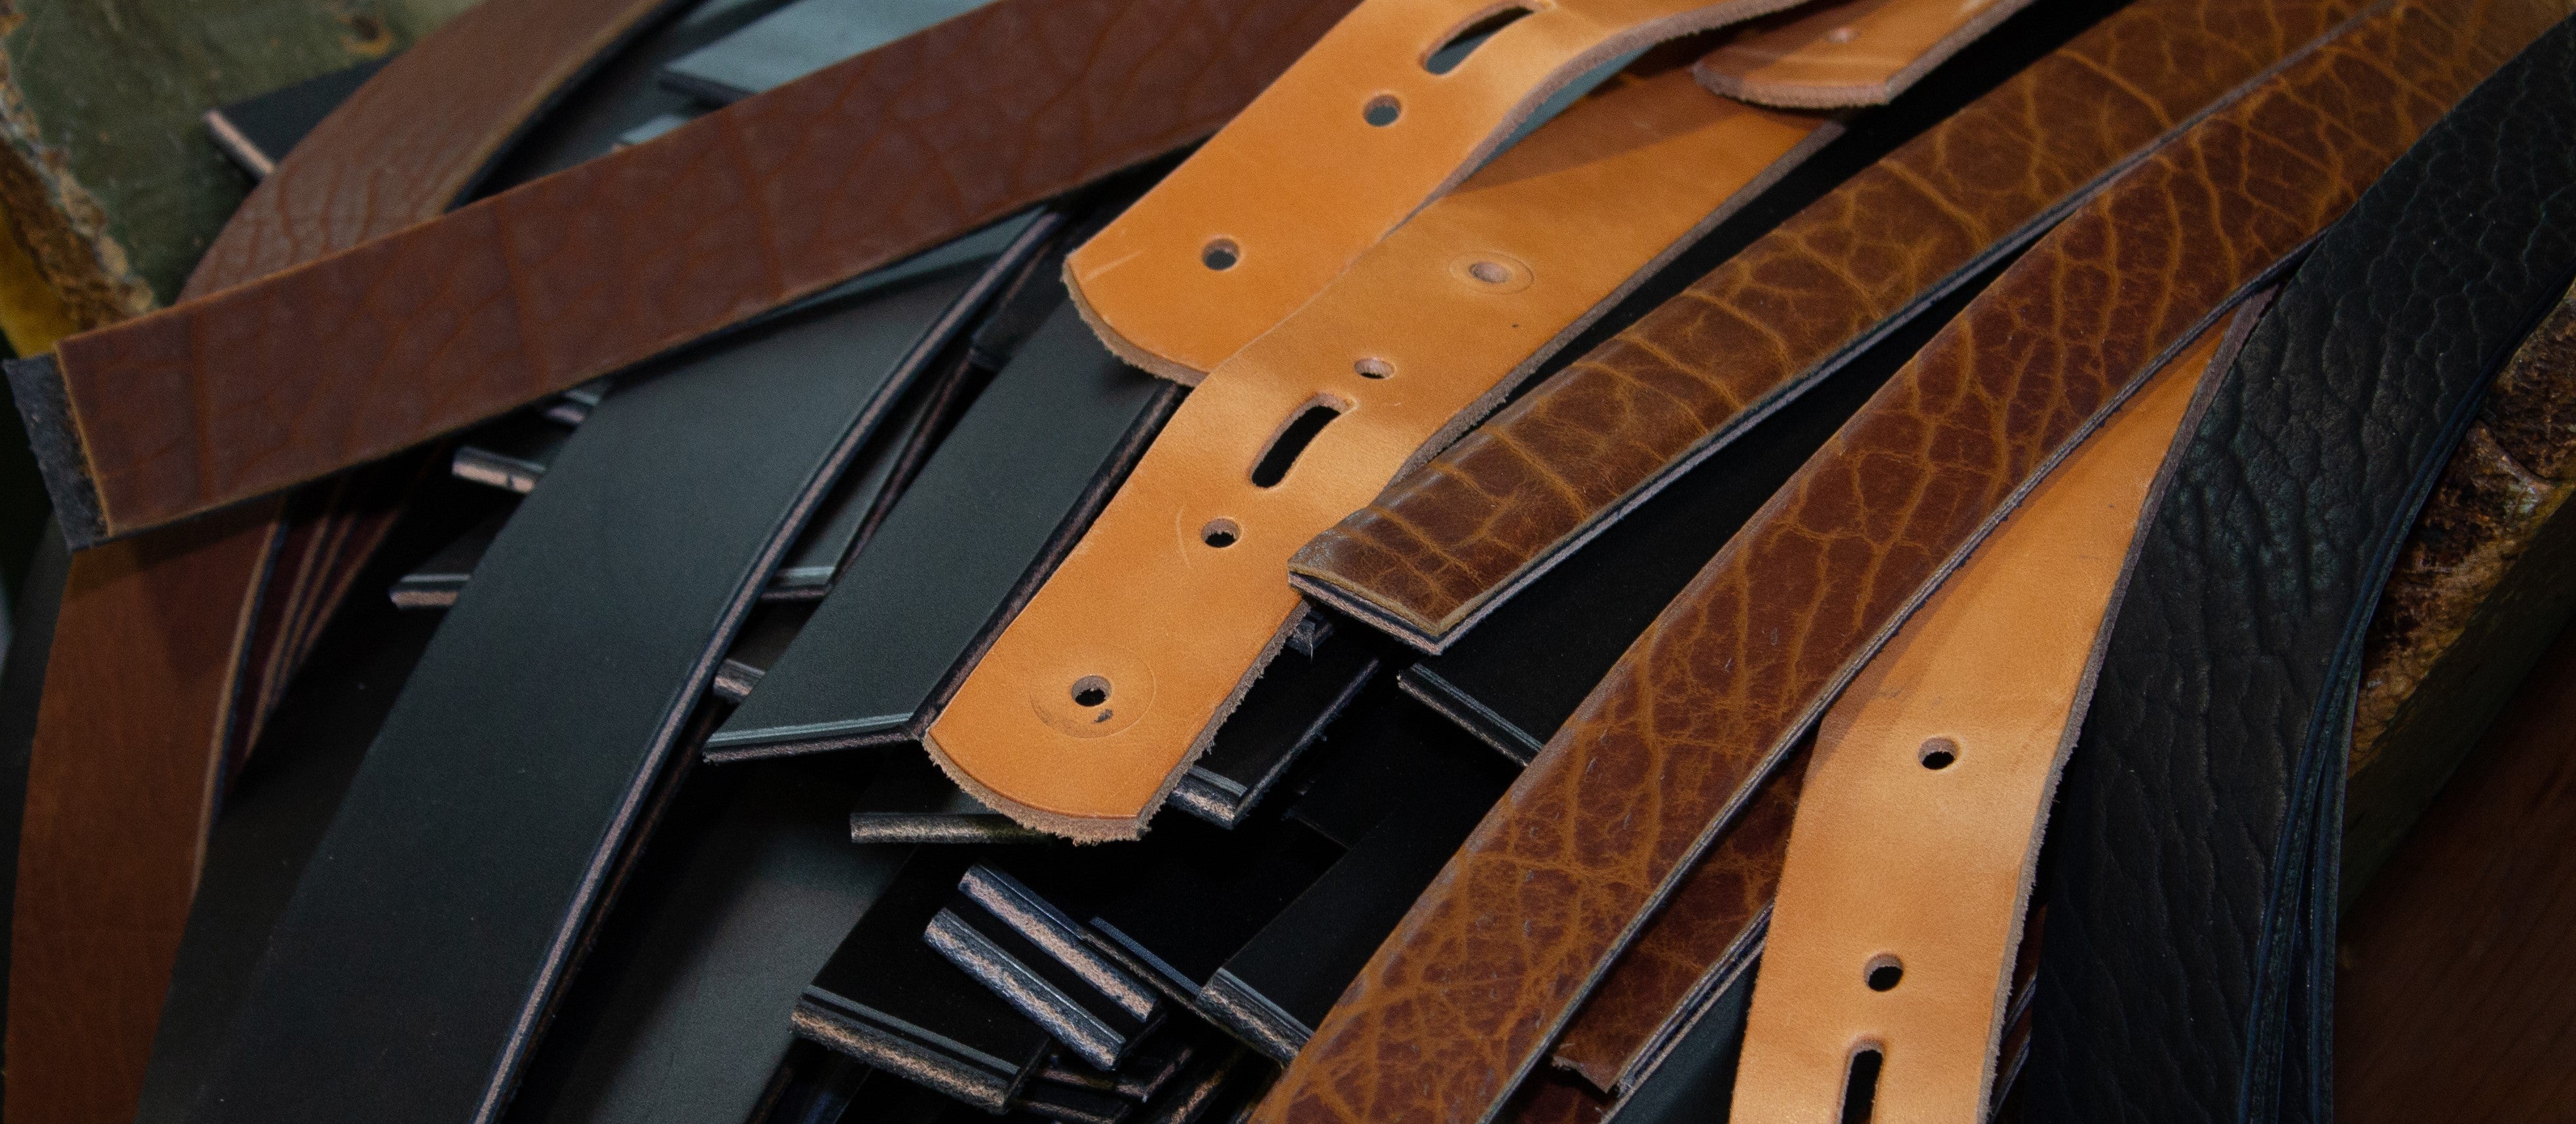 Grease leather belt nature, Brown | Manufactum